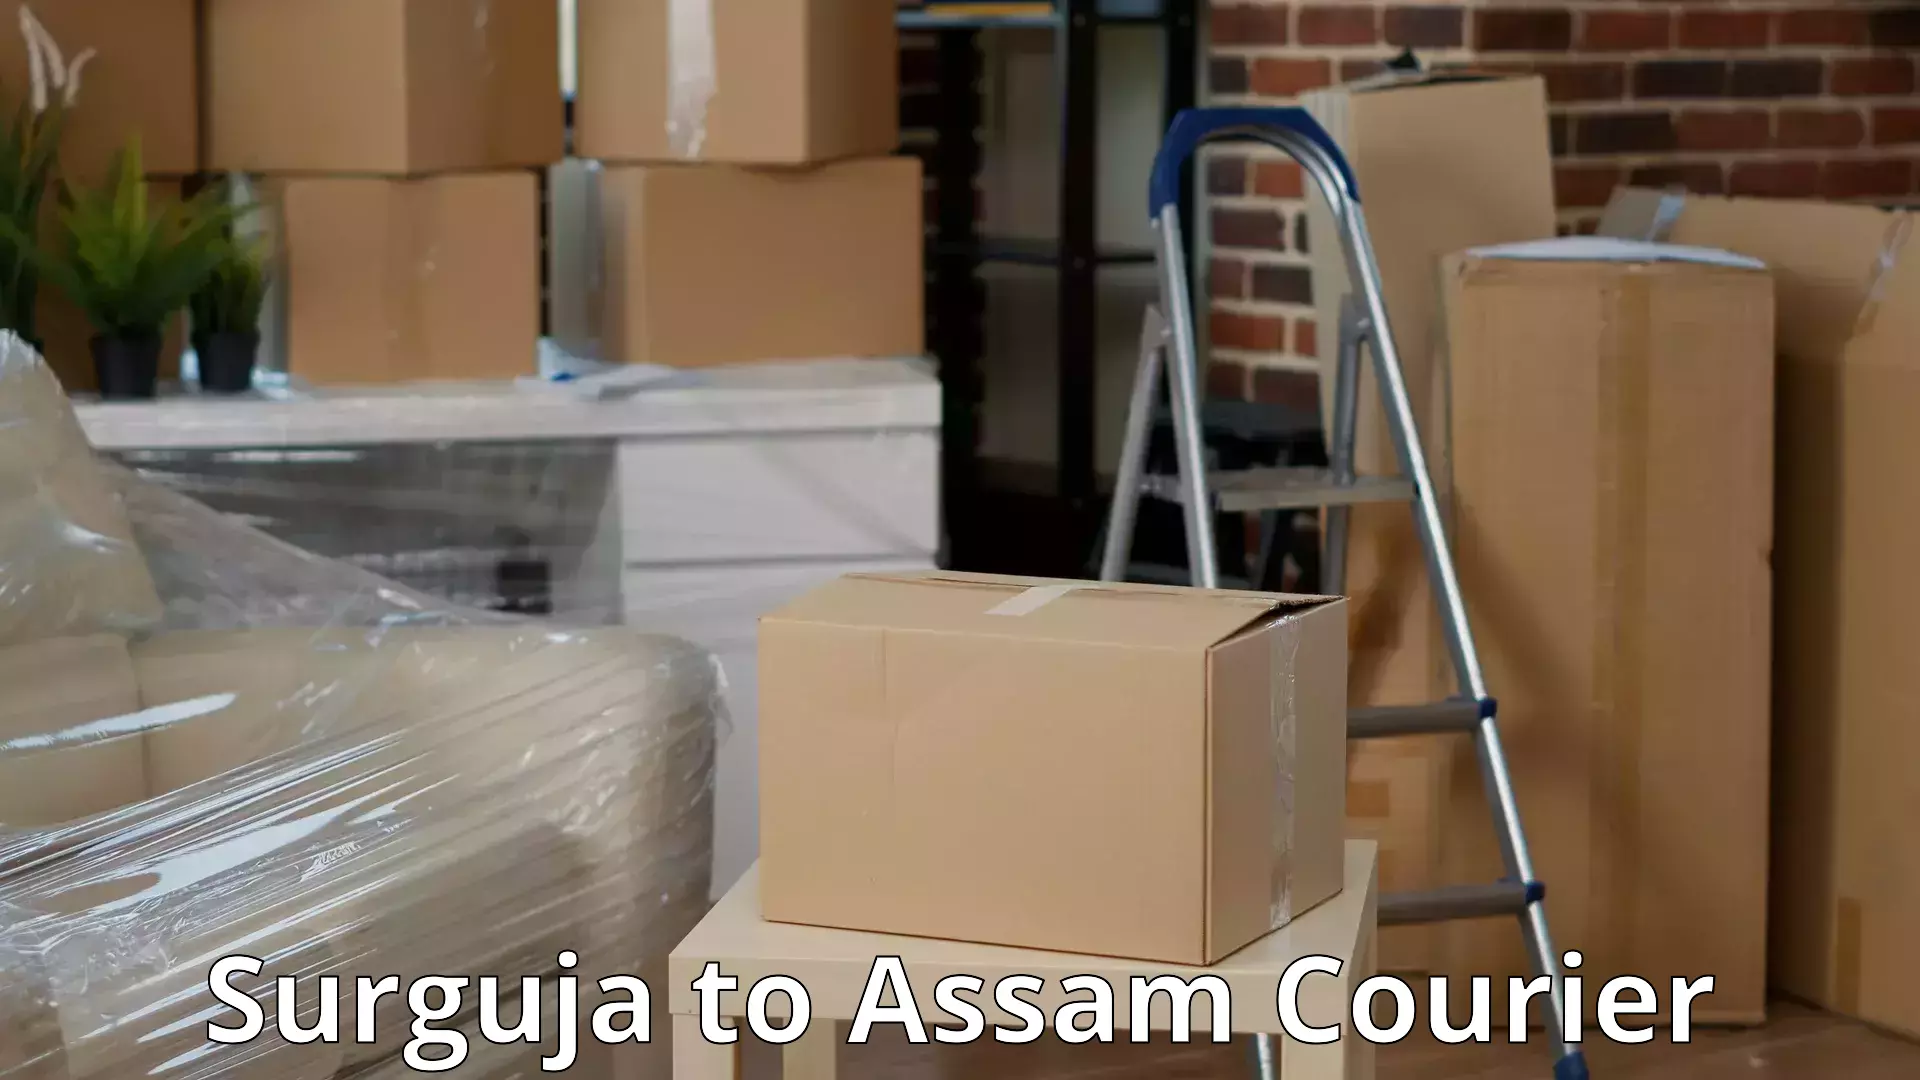 Specialized moving company Surguja to Guwahati